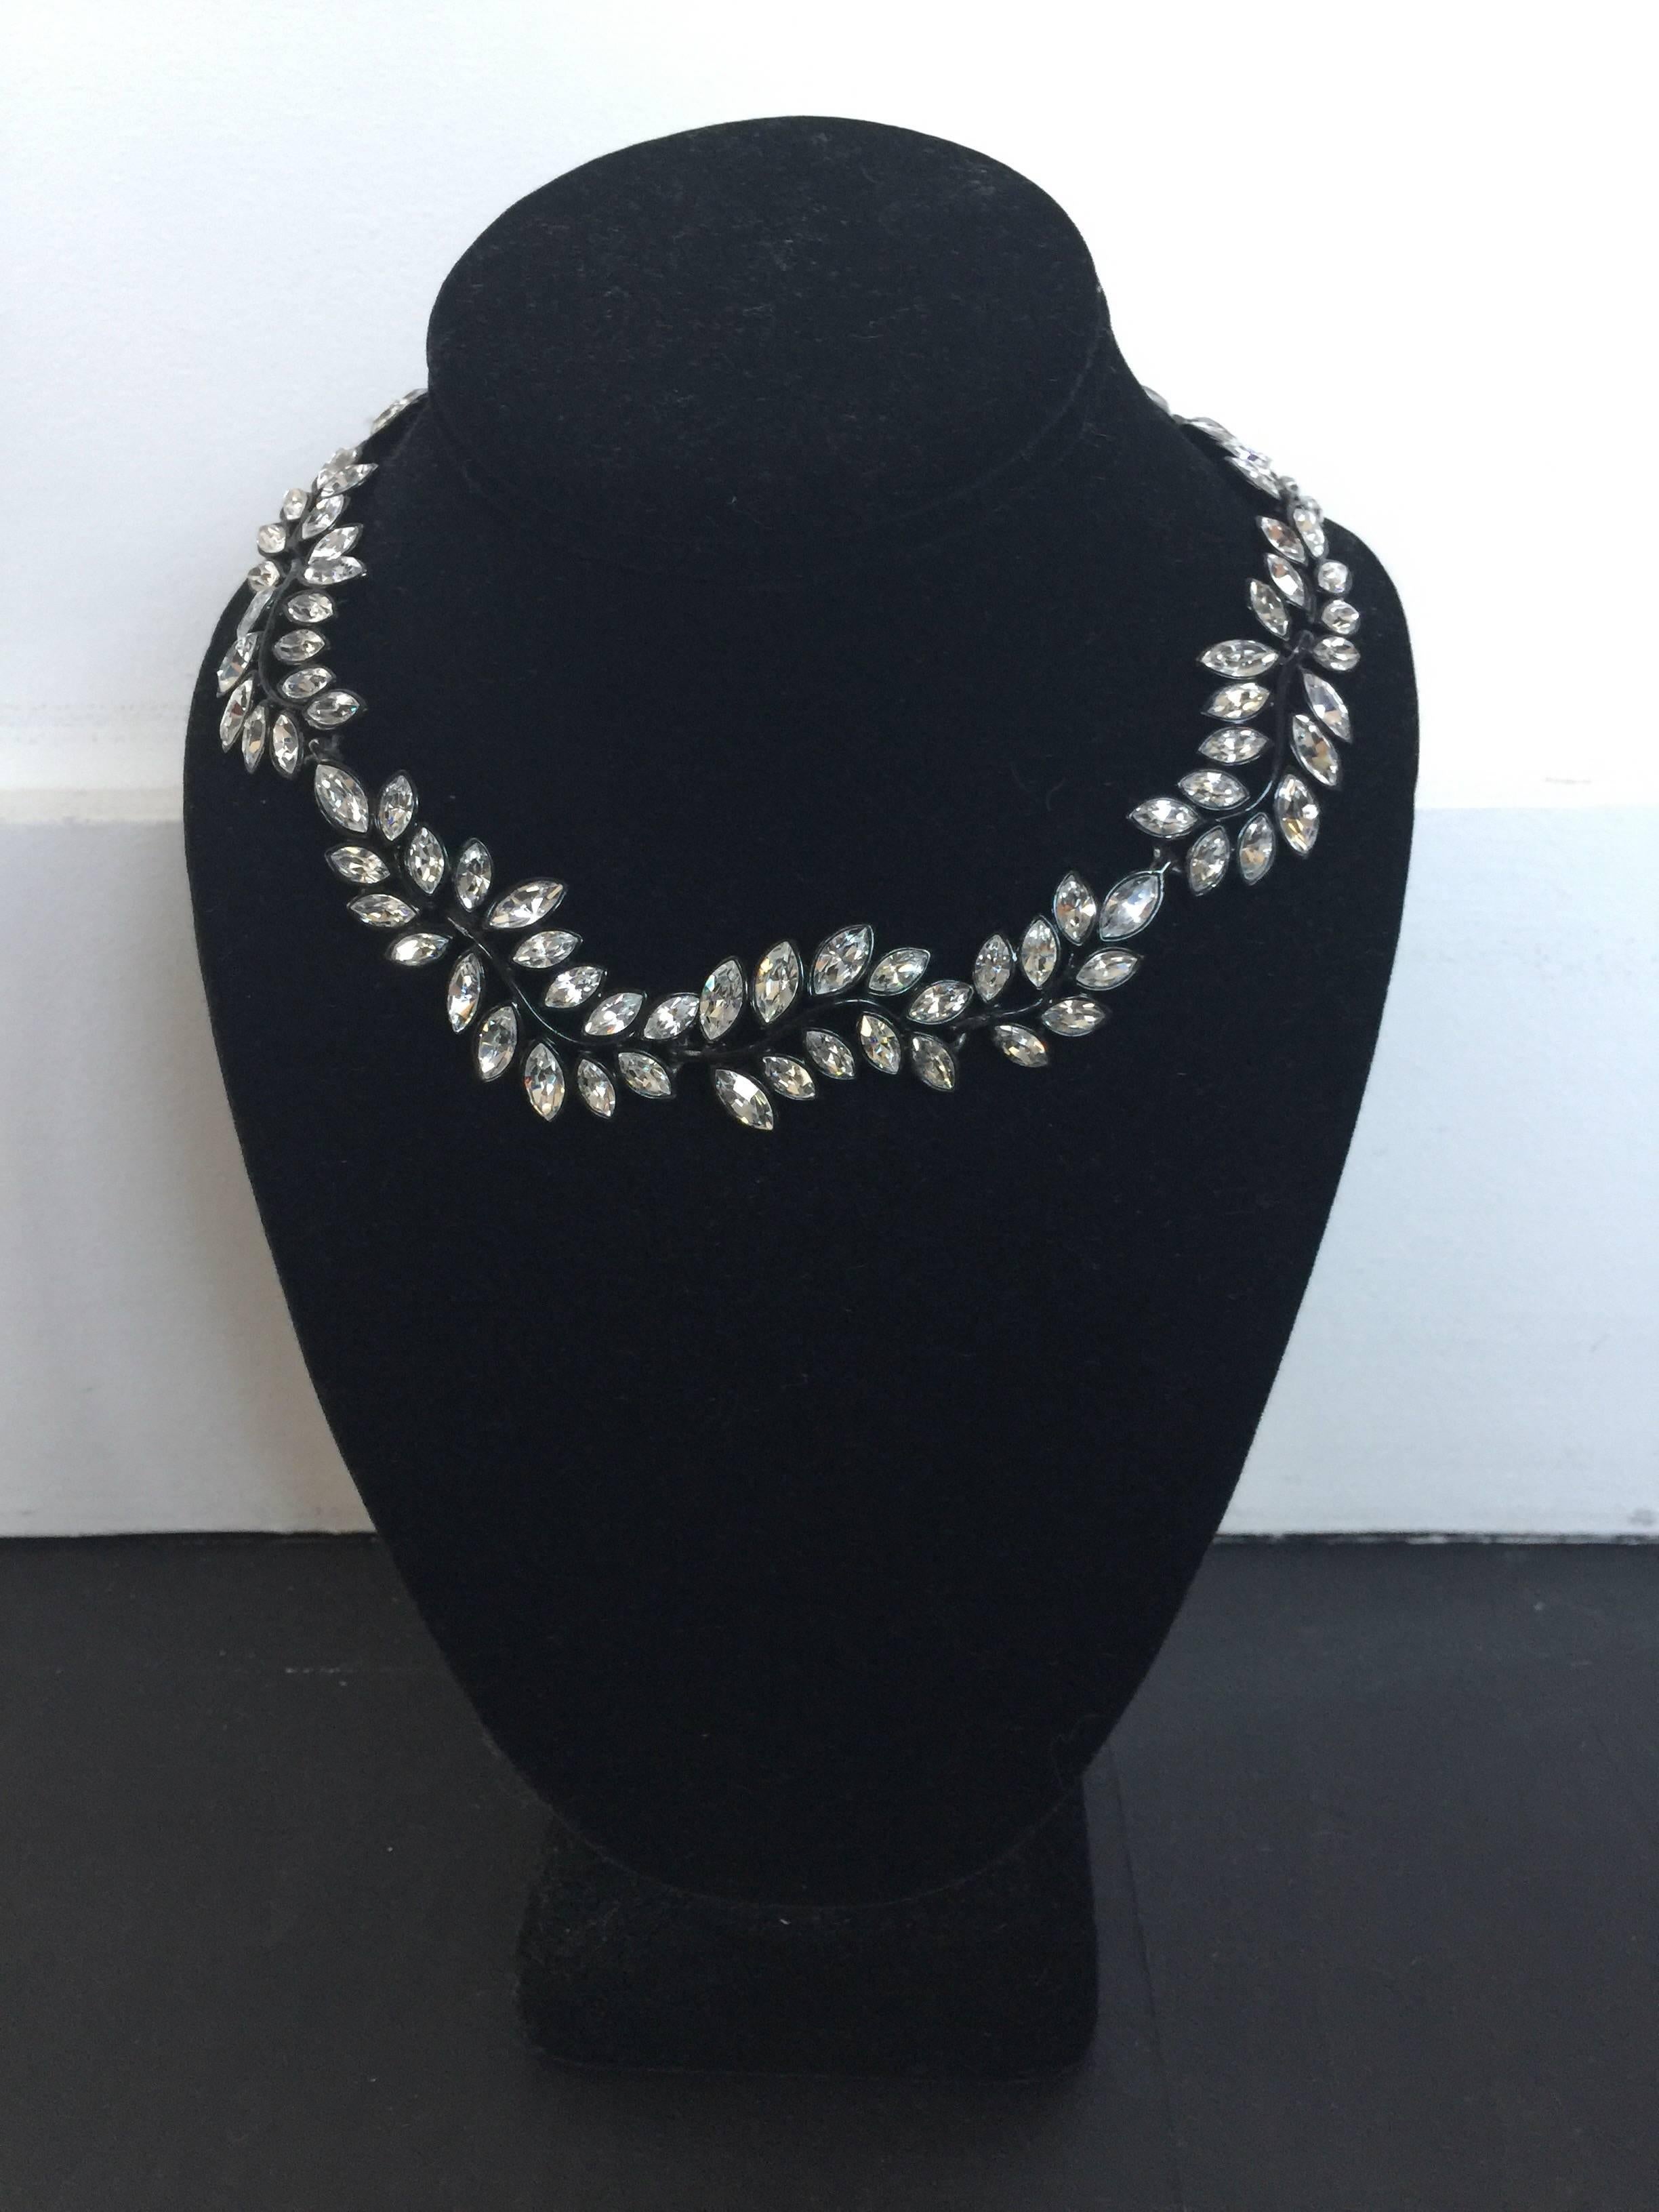 This KJL necklace is from early 20s.  It was from the KJL showroom but seems to be missing a signature.  It is blackened metal and crystal leaves and a great addition to any look.